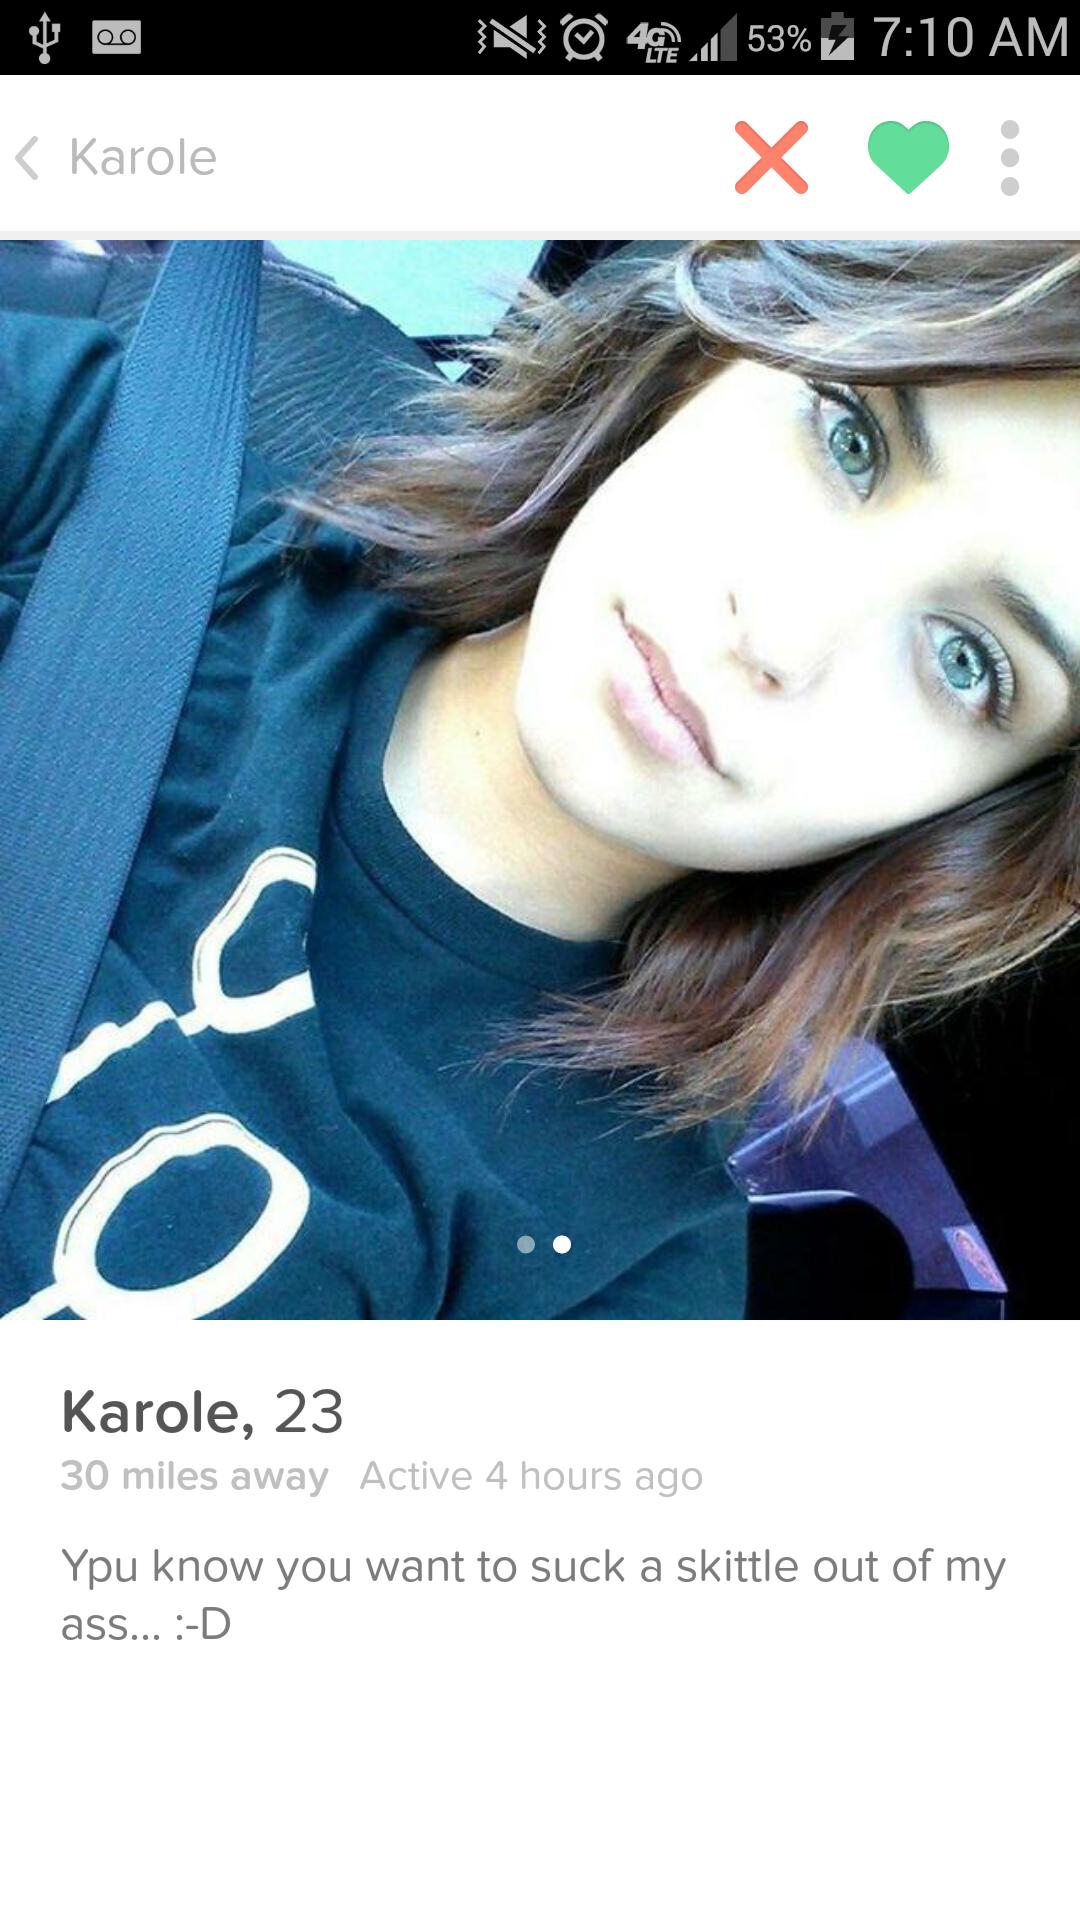 eye - N 4724 53% i s Karole Karole, 23 30 miles away Active 4 hours ago You know you want to suck a skittle out of my ass... D